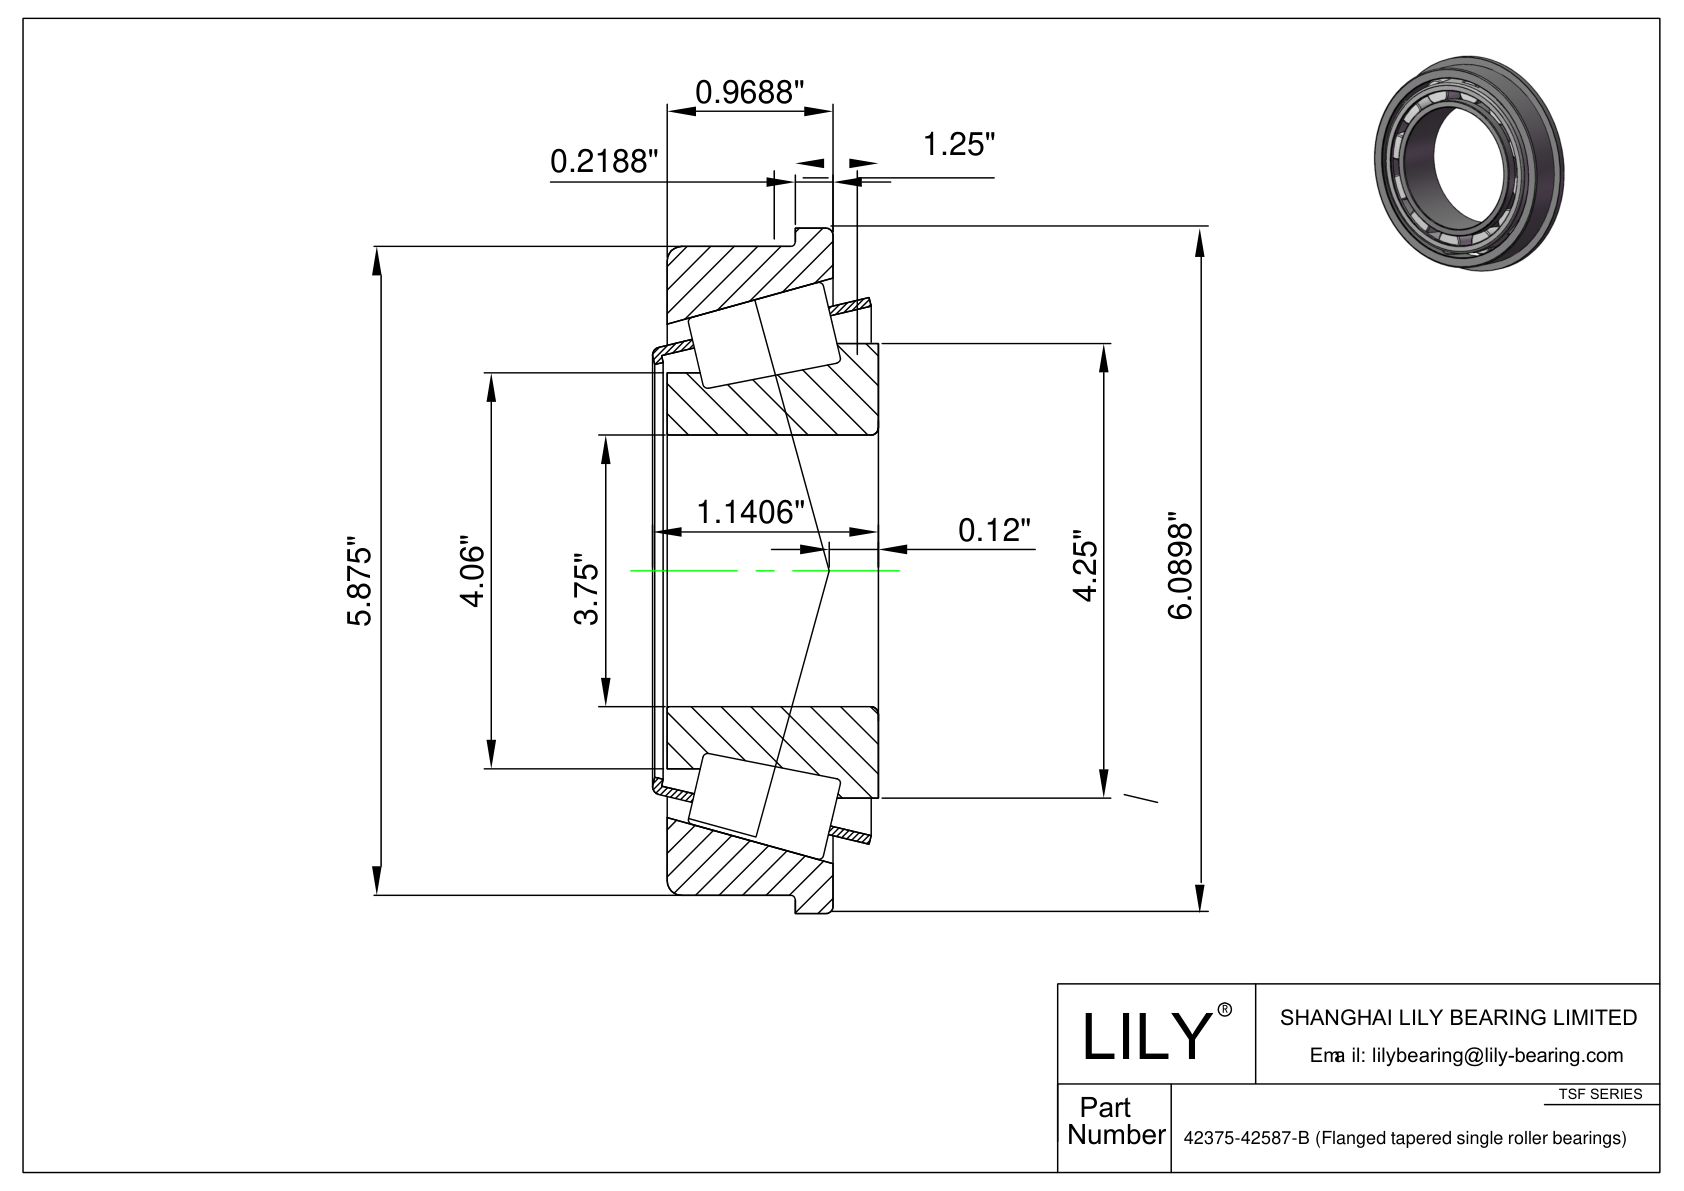 42375-42587-B TSF (Tapered Single Roller Bearings with Flange) (Imperial) cad drawing